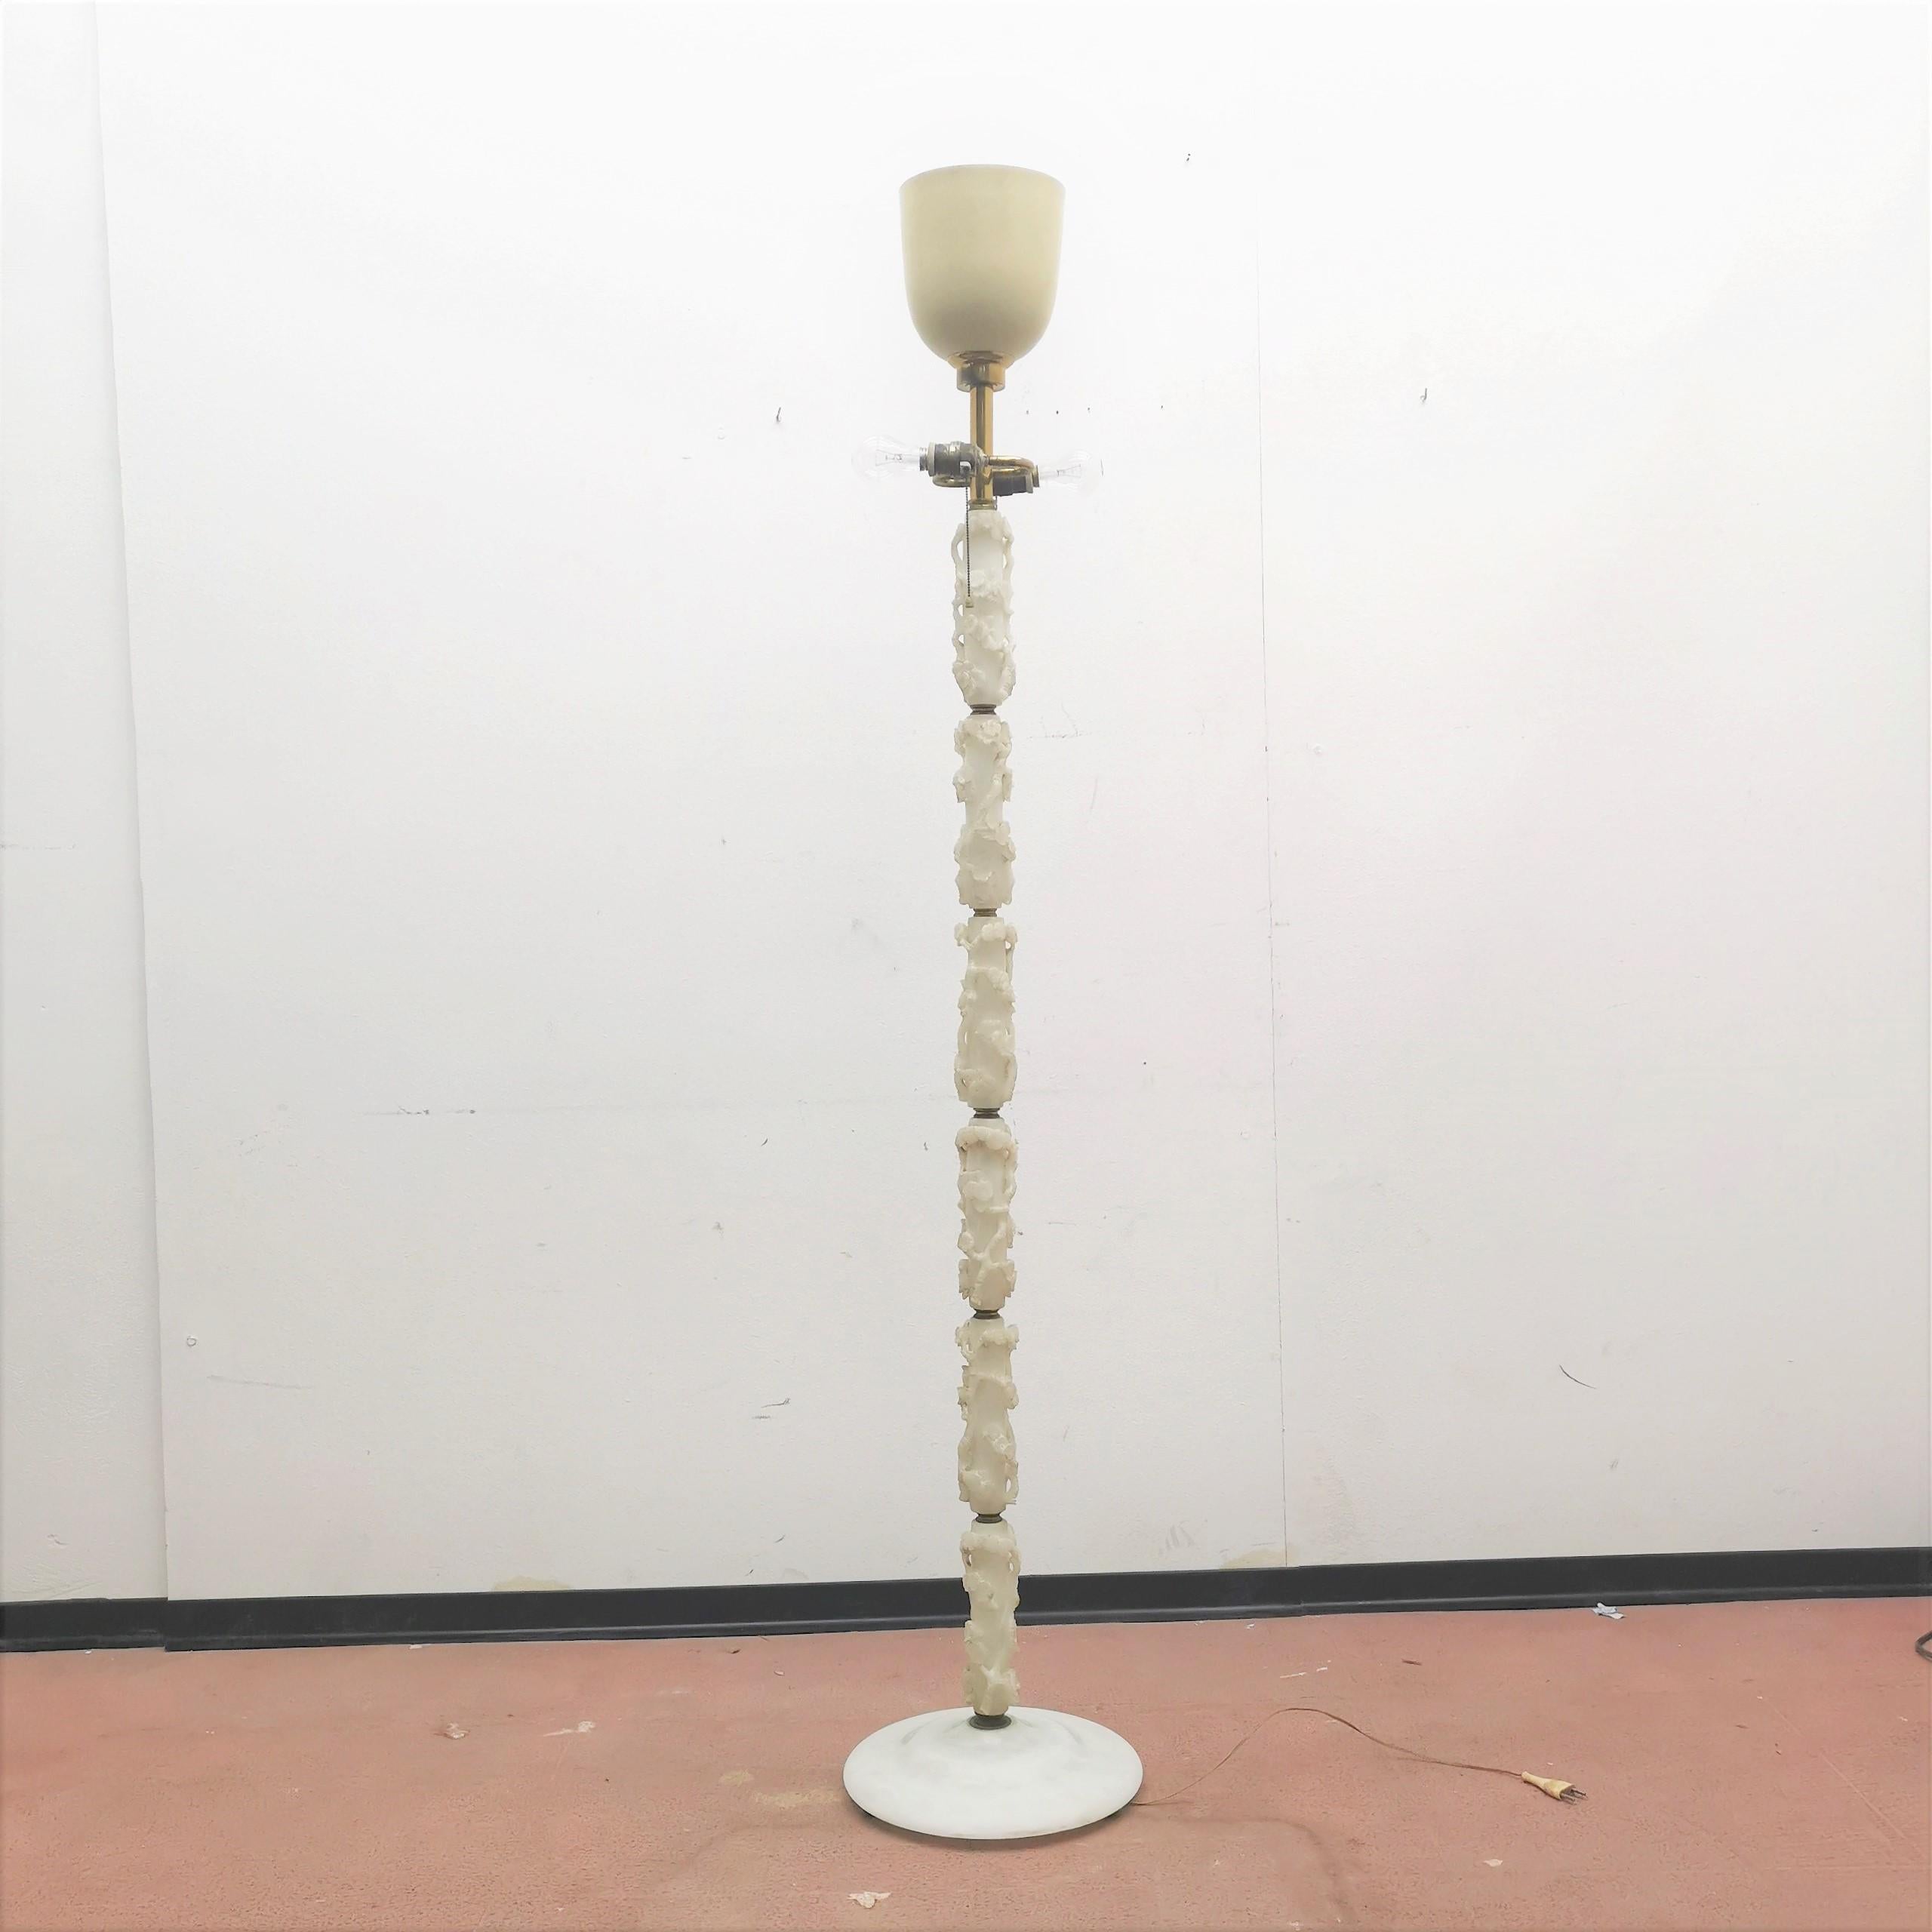 Prestigious floor lamp with alabaster elements carved with floral motifs connected by brass rings and curved supports , upper metal diffuser. Italy 1950s.
Wear consistent with age and use.